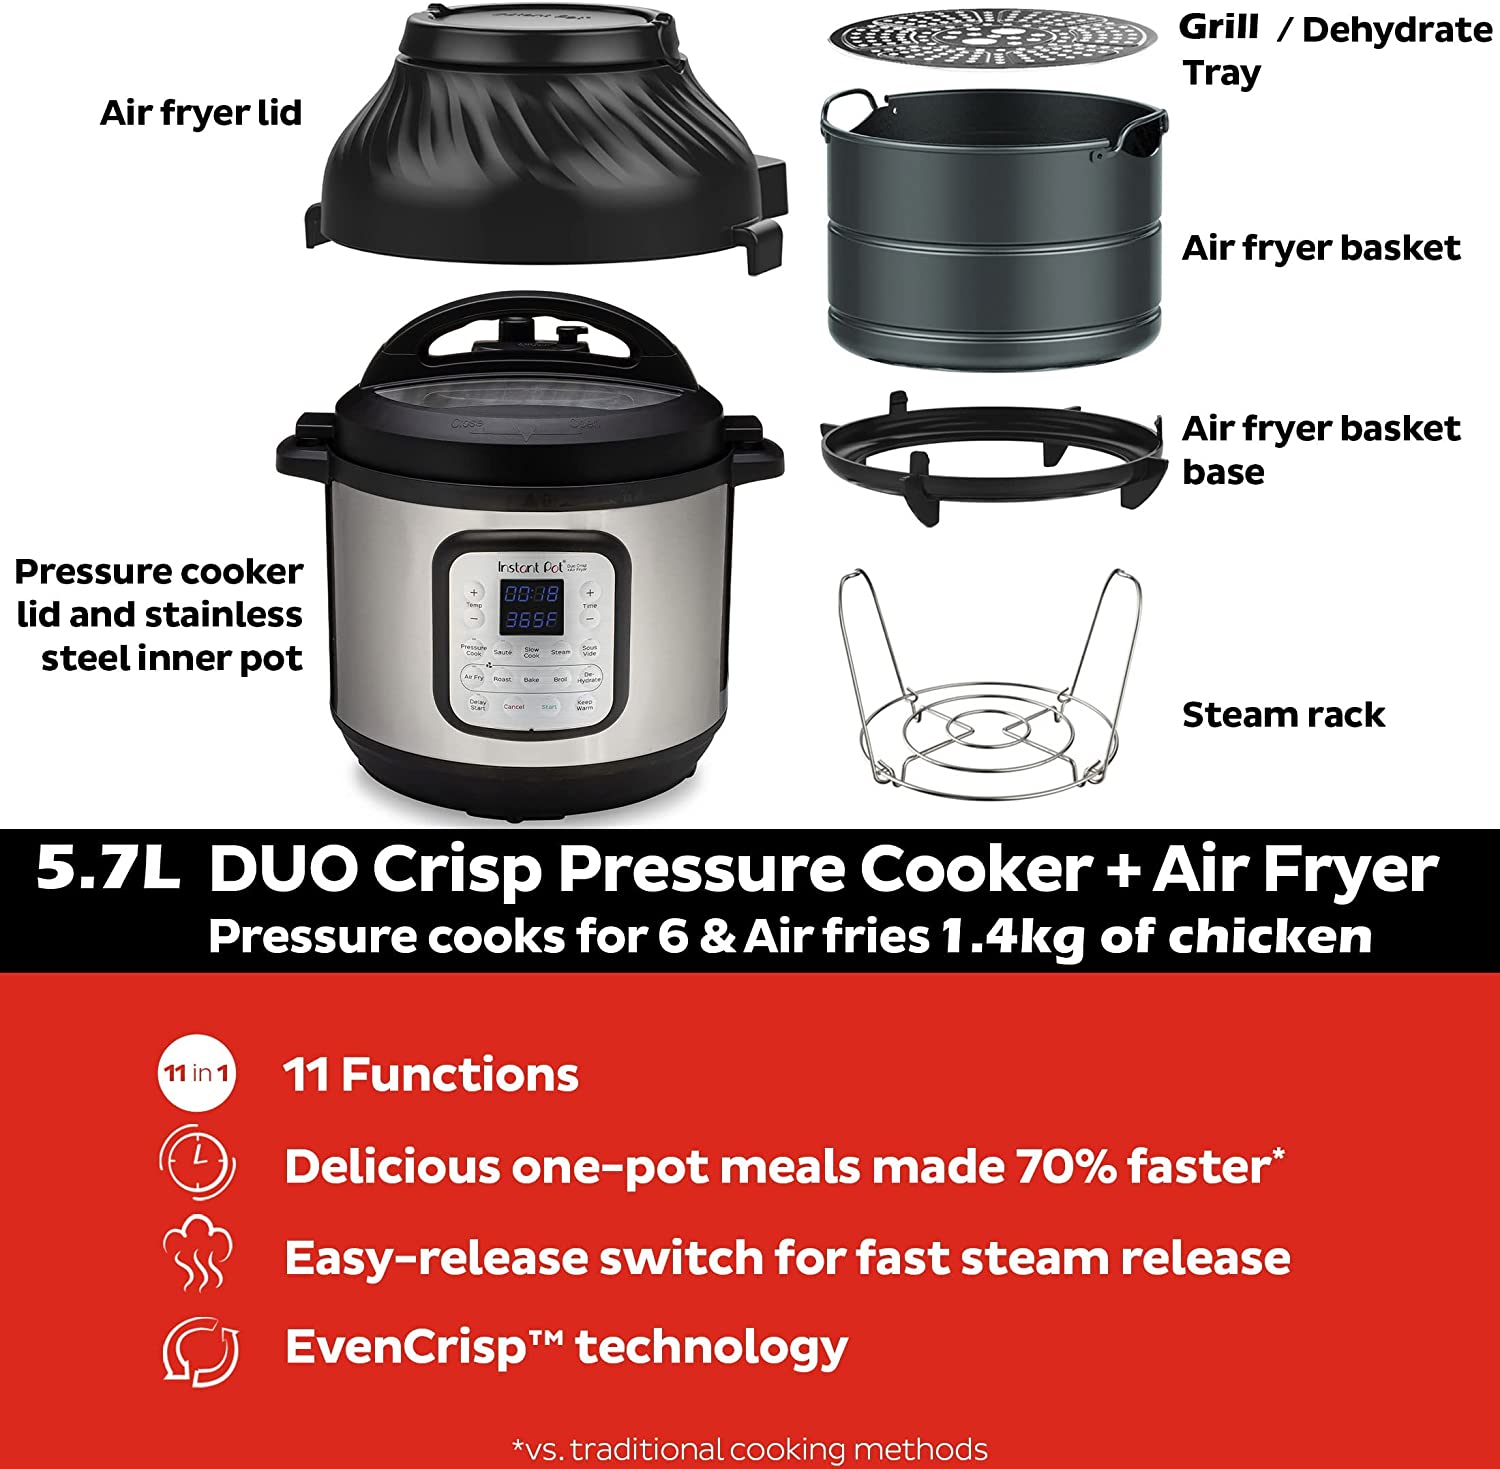 What is the wattage of Instant Pot Duo Crisp 11-in-1 Air Fryer and